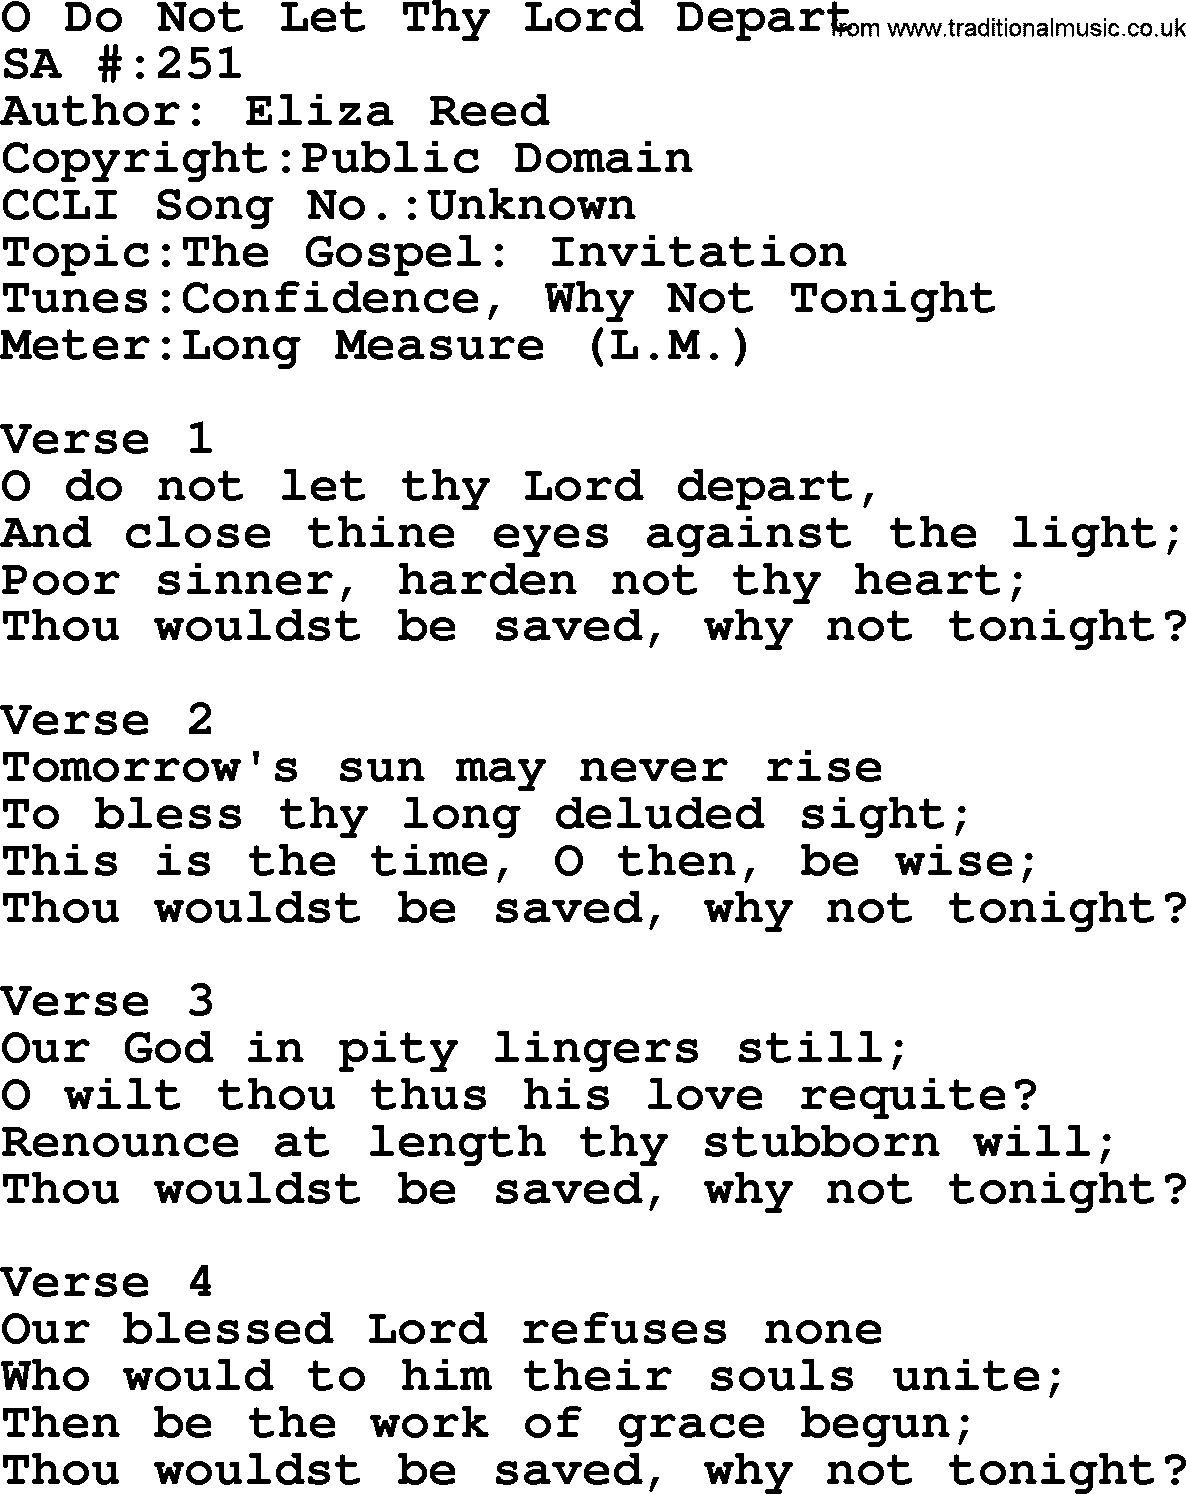 Salvation Army Hymnal, title: O Do Not Let Thy Lord Depart, with lyrics and PDF,